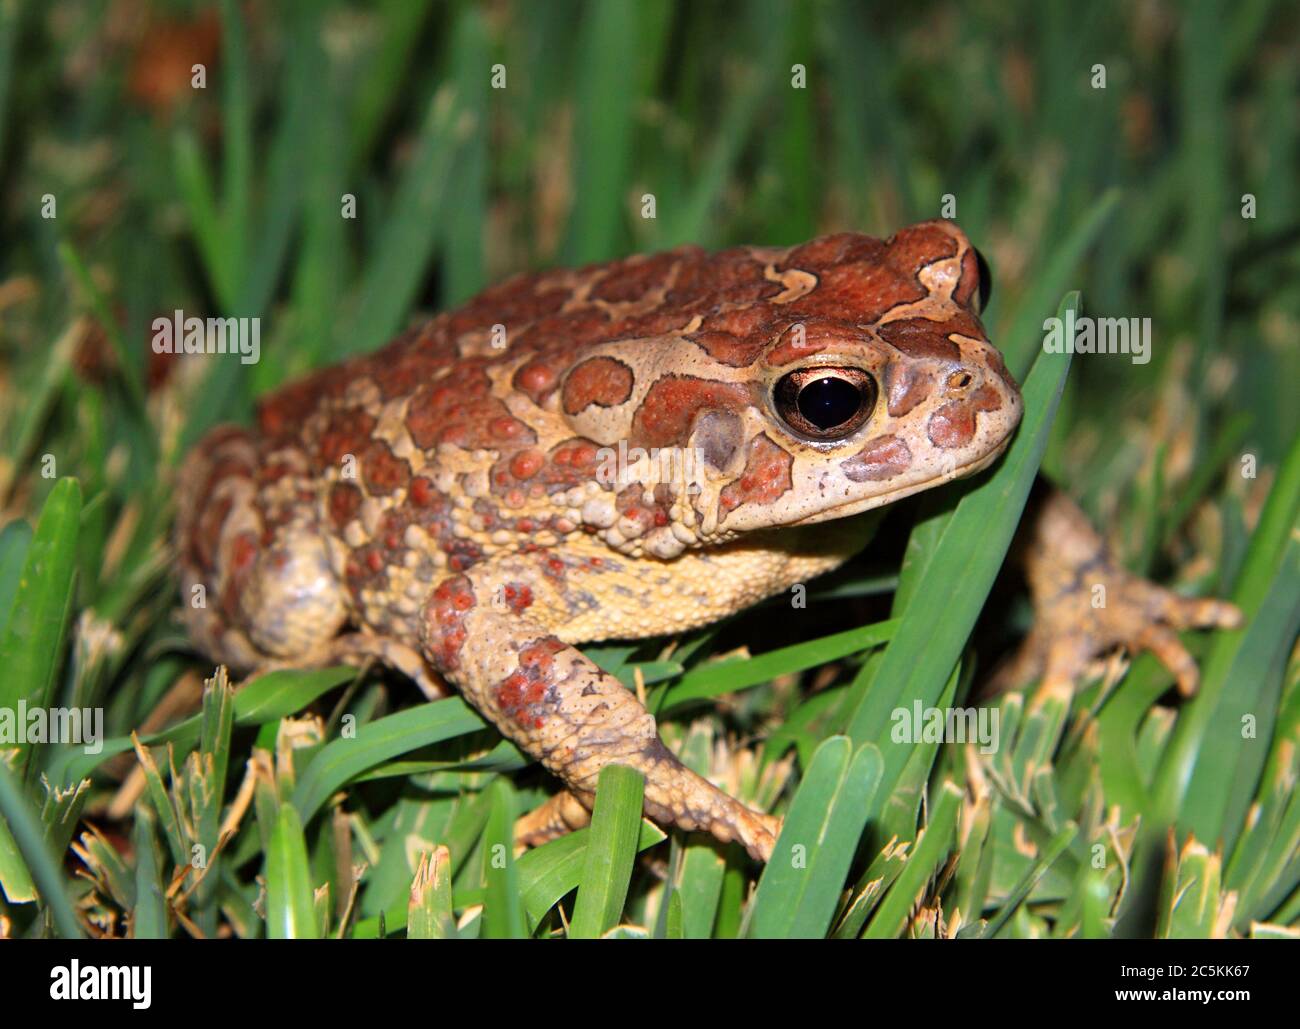 Moroccan Spadefoot Toad (Pelobates varaldii) in the grass at night - protected species - rare photo. Red list of endangered species. Stock Photo